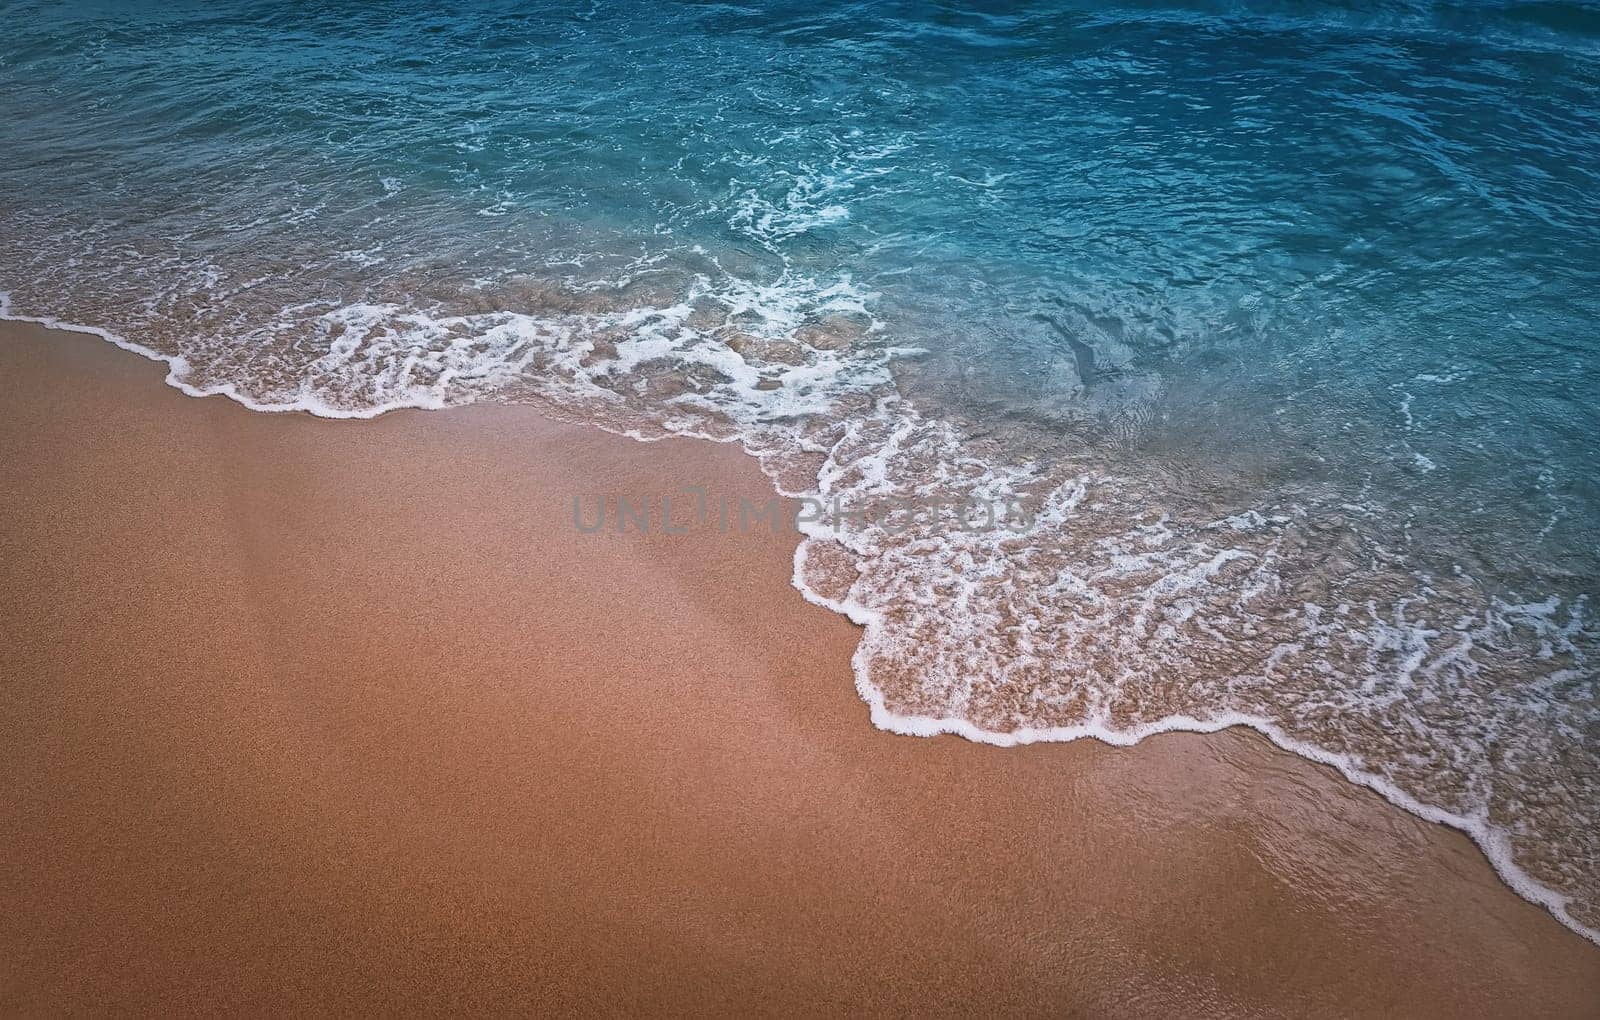 Serene blue sea with foamy waves hits the sandy shore. Beach and water texture, moody vertical background. Summer vacation seaside, holiday recreation concept